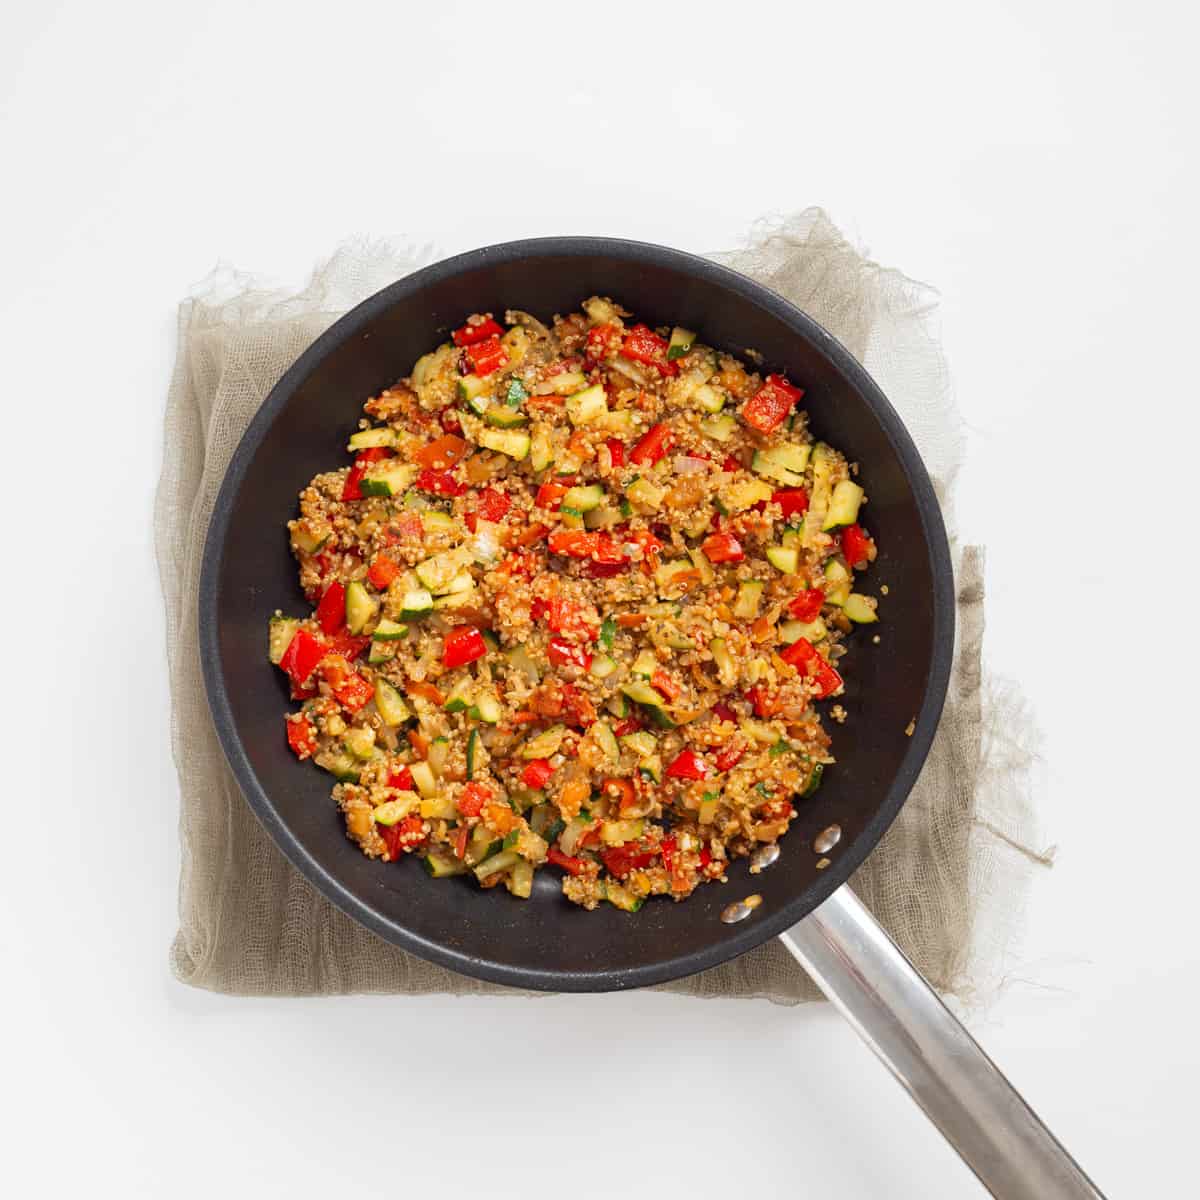 An image of sauteed vegetables mixed with quinoa and italian seasoning on a skillet.